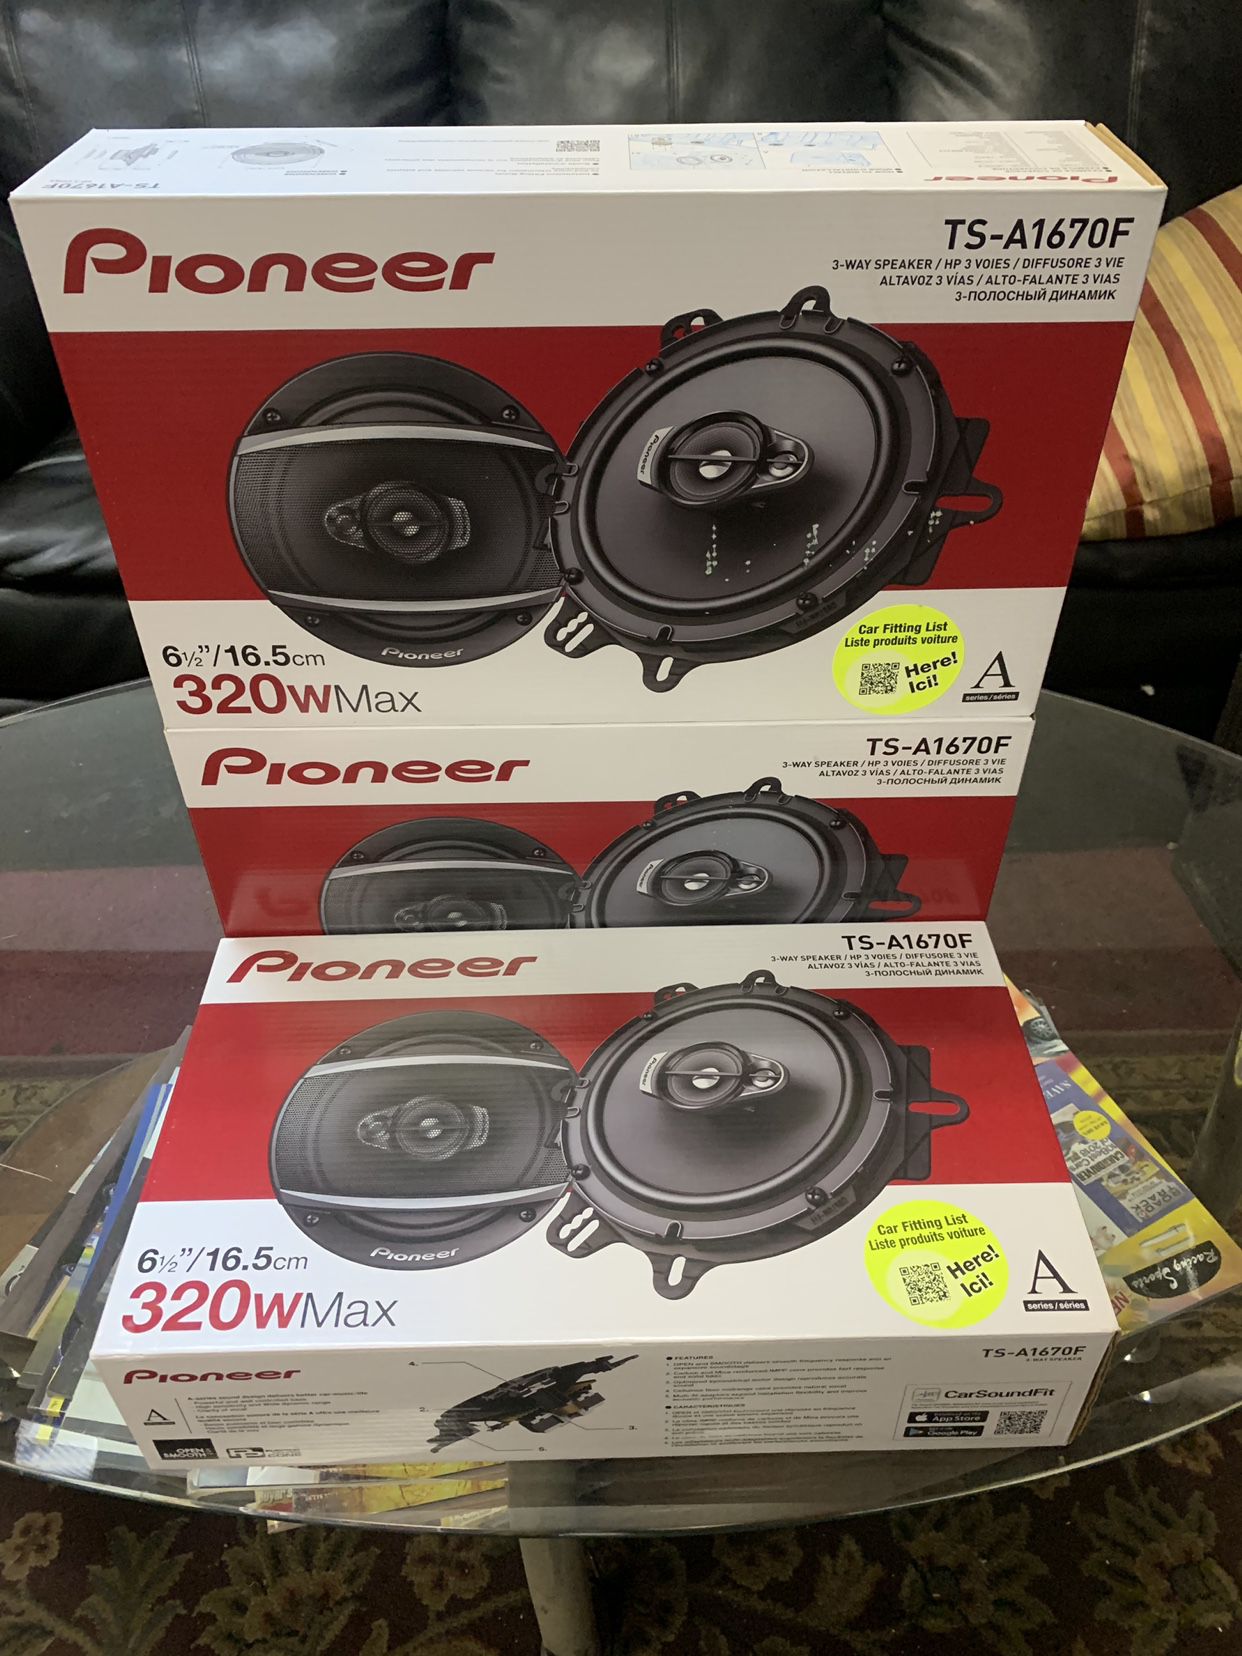 Pioneer Car Audio . 6.5 Inch Car Stereo Speakers . High Quality . 320 watts . New Years Super Sale $55 A Pair While They Last . New